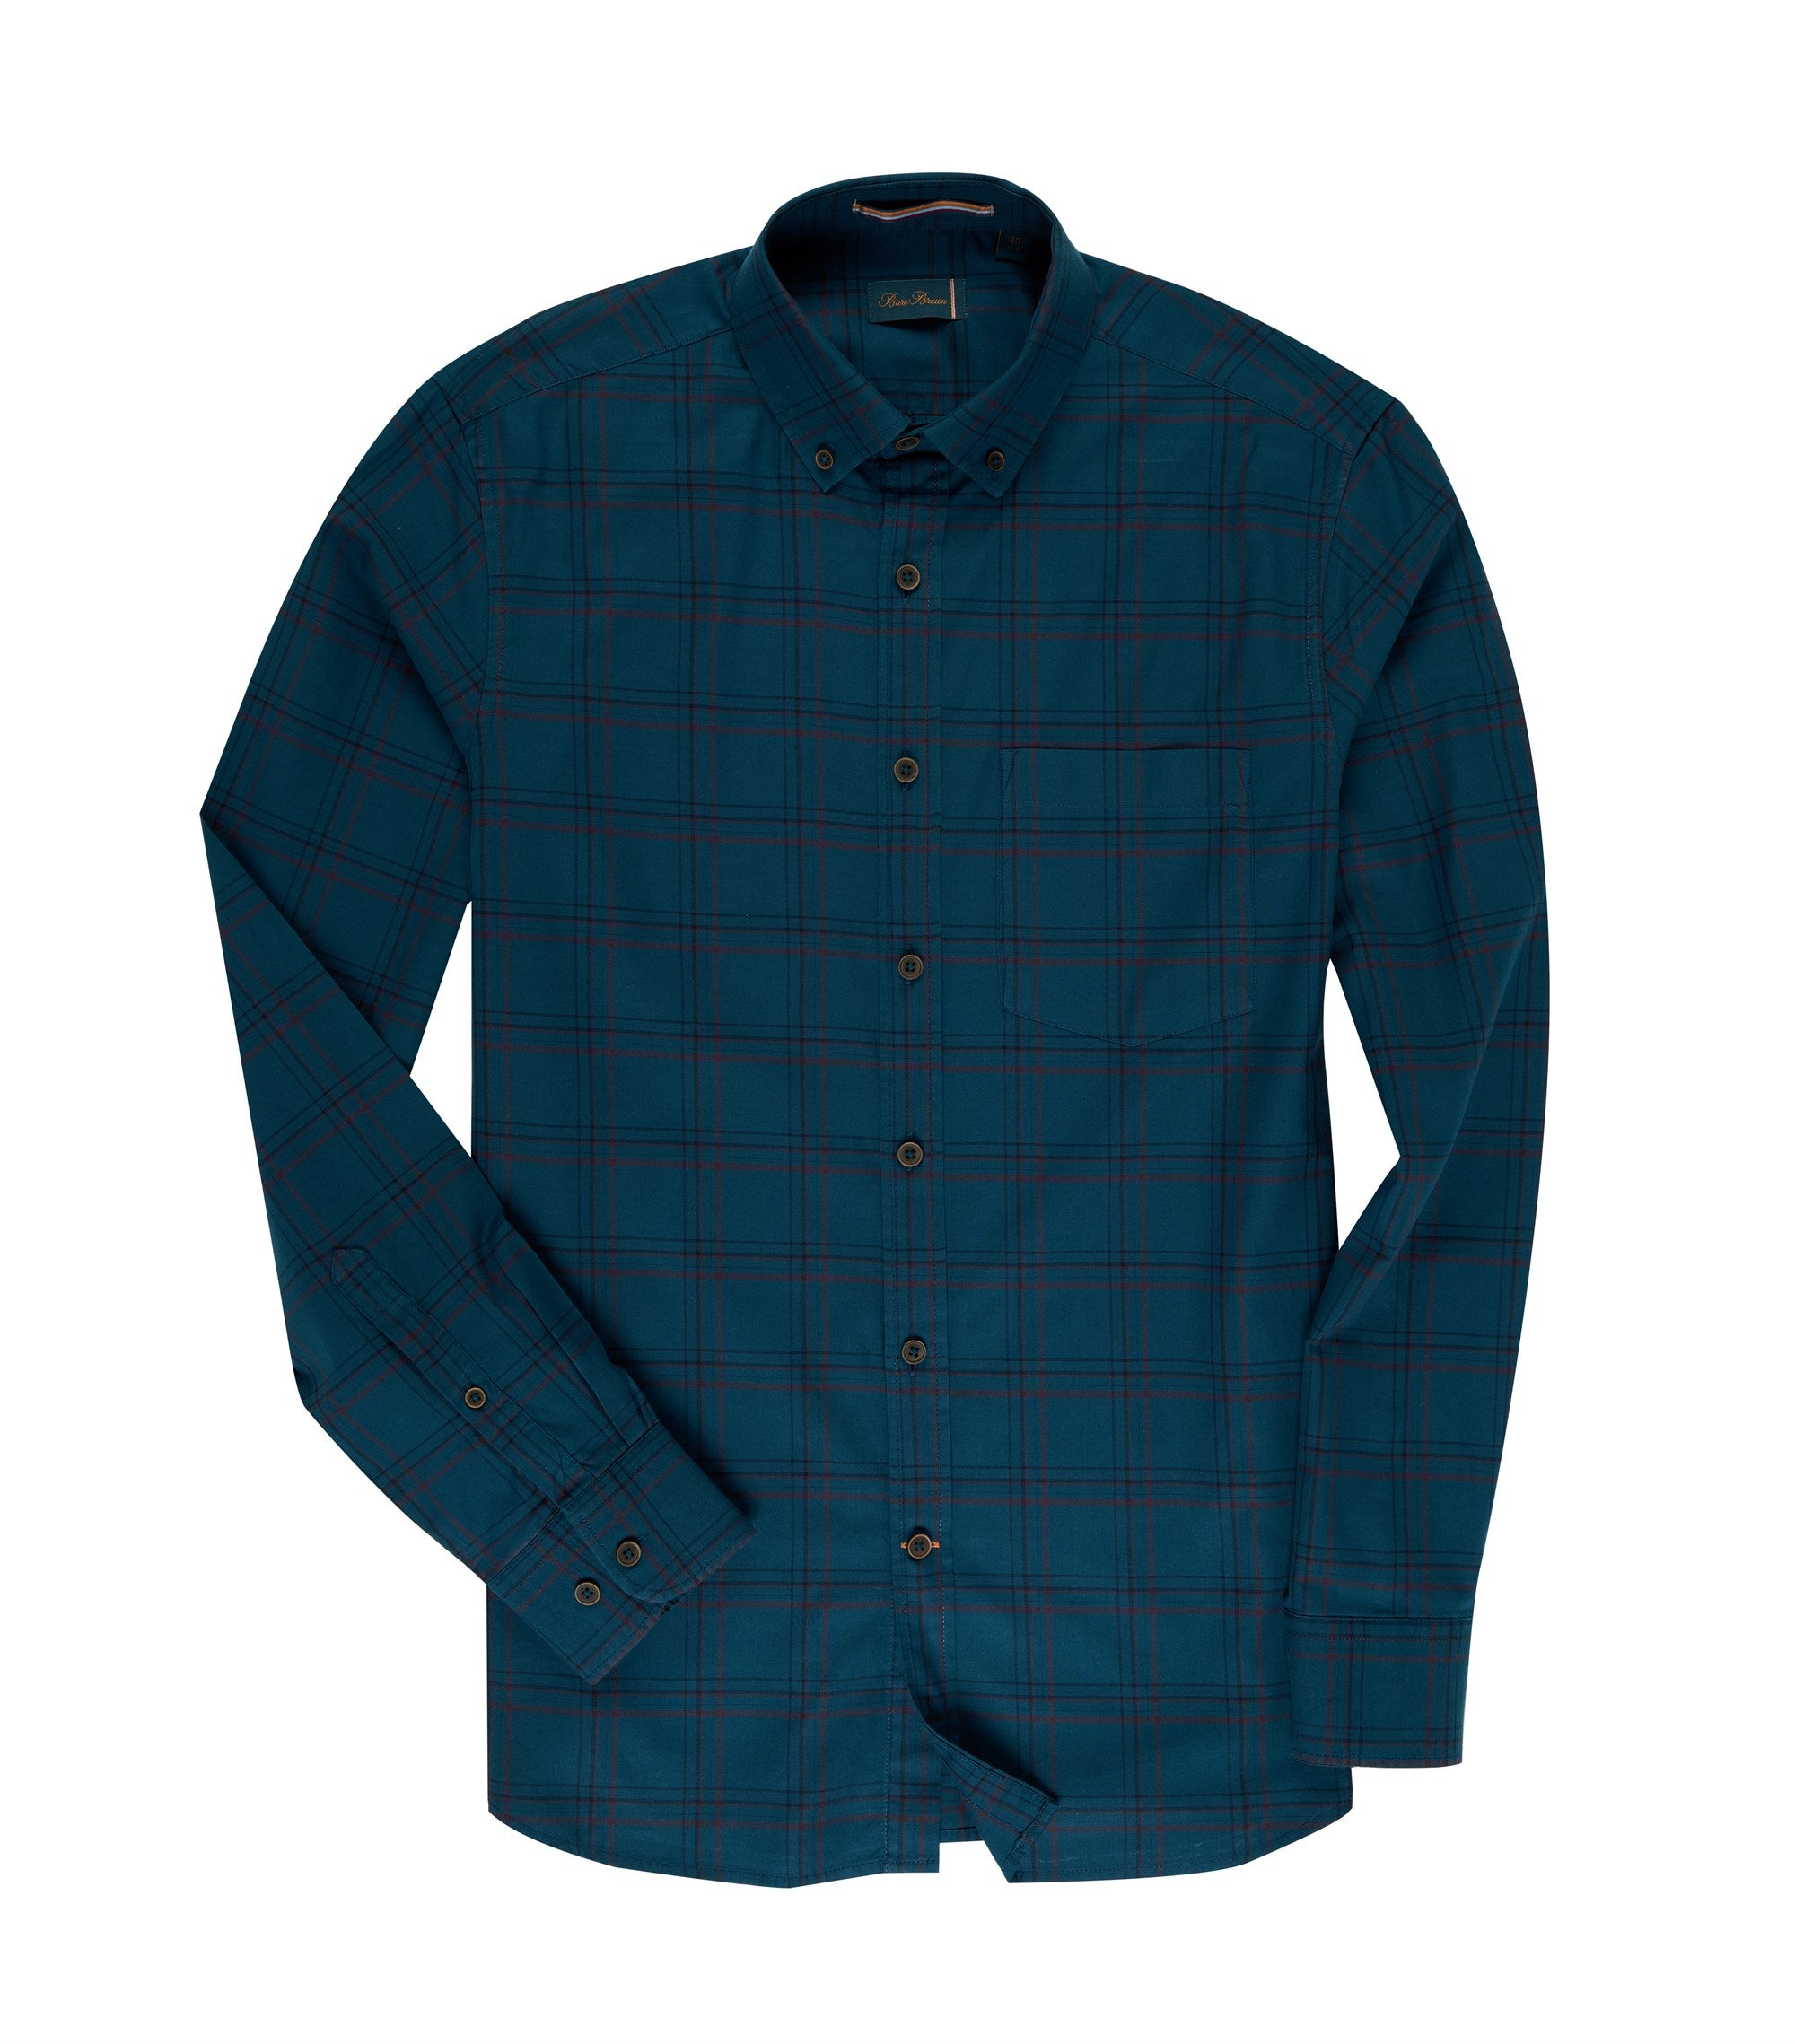 Bare Brown Buttondown Collar Cotton Checked Shirt, Slim Fit with Full Sleeves - Teal